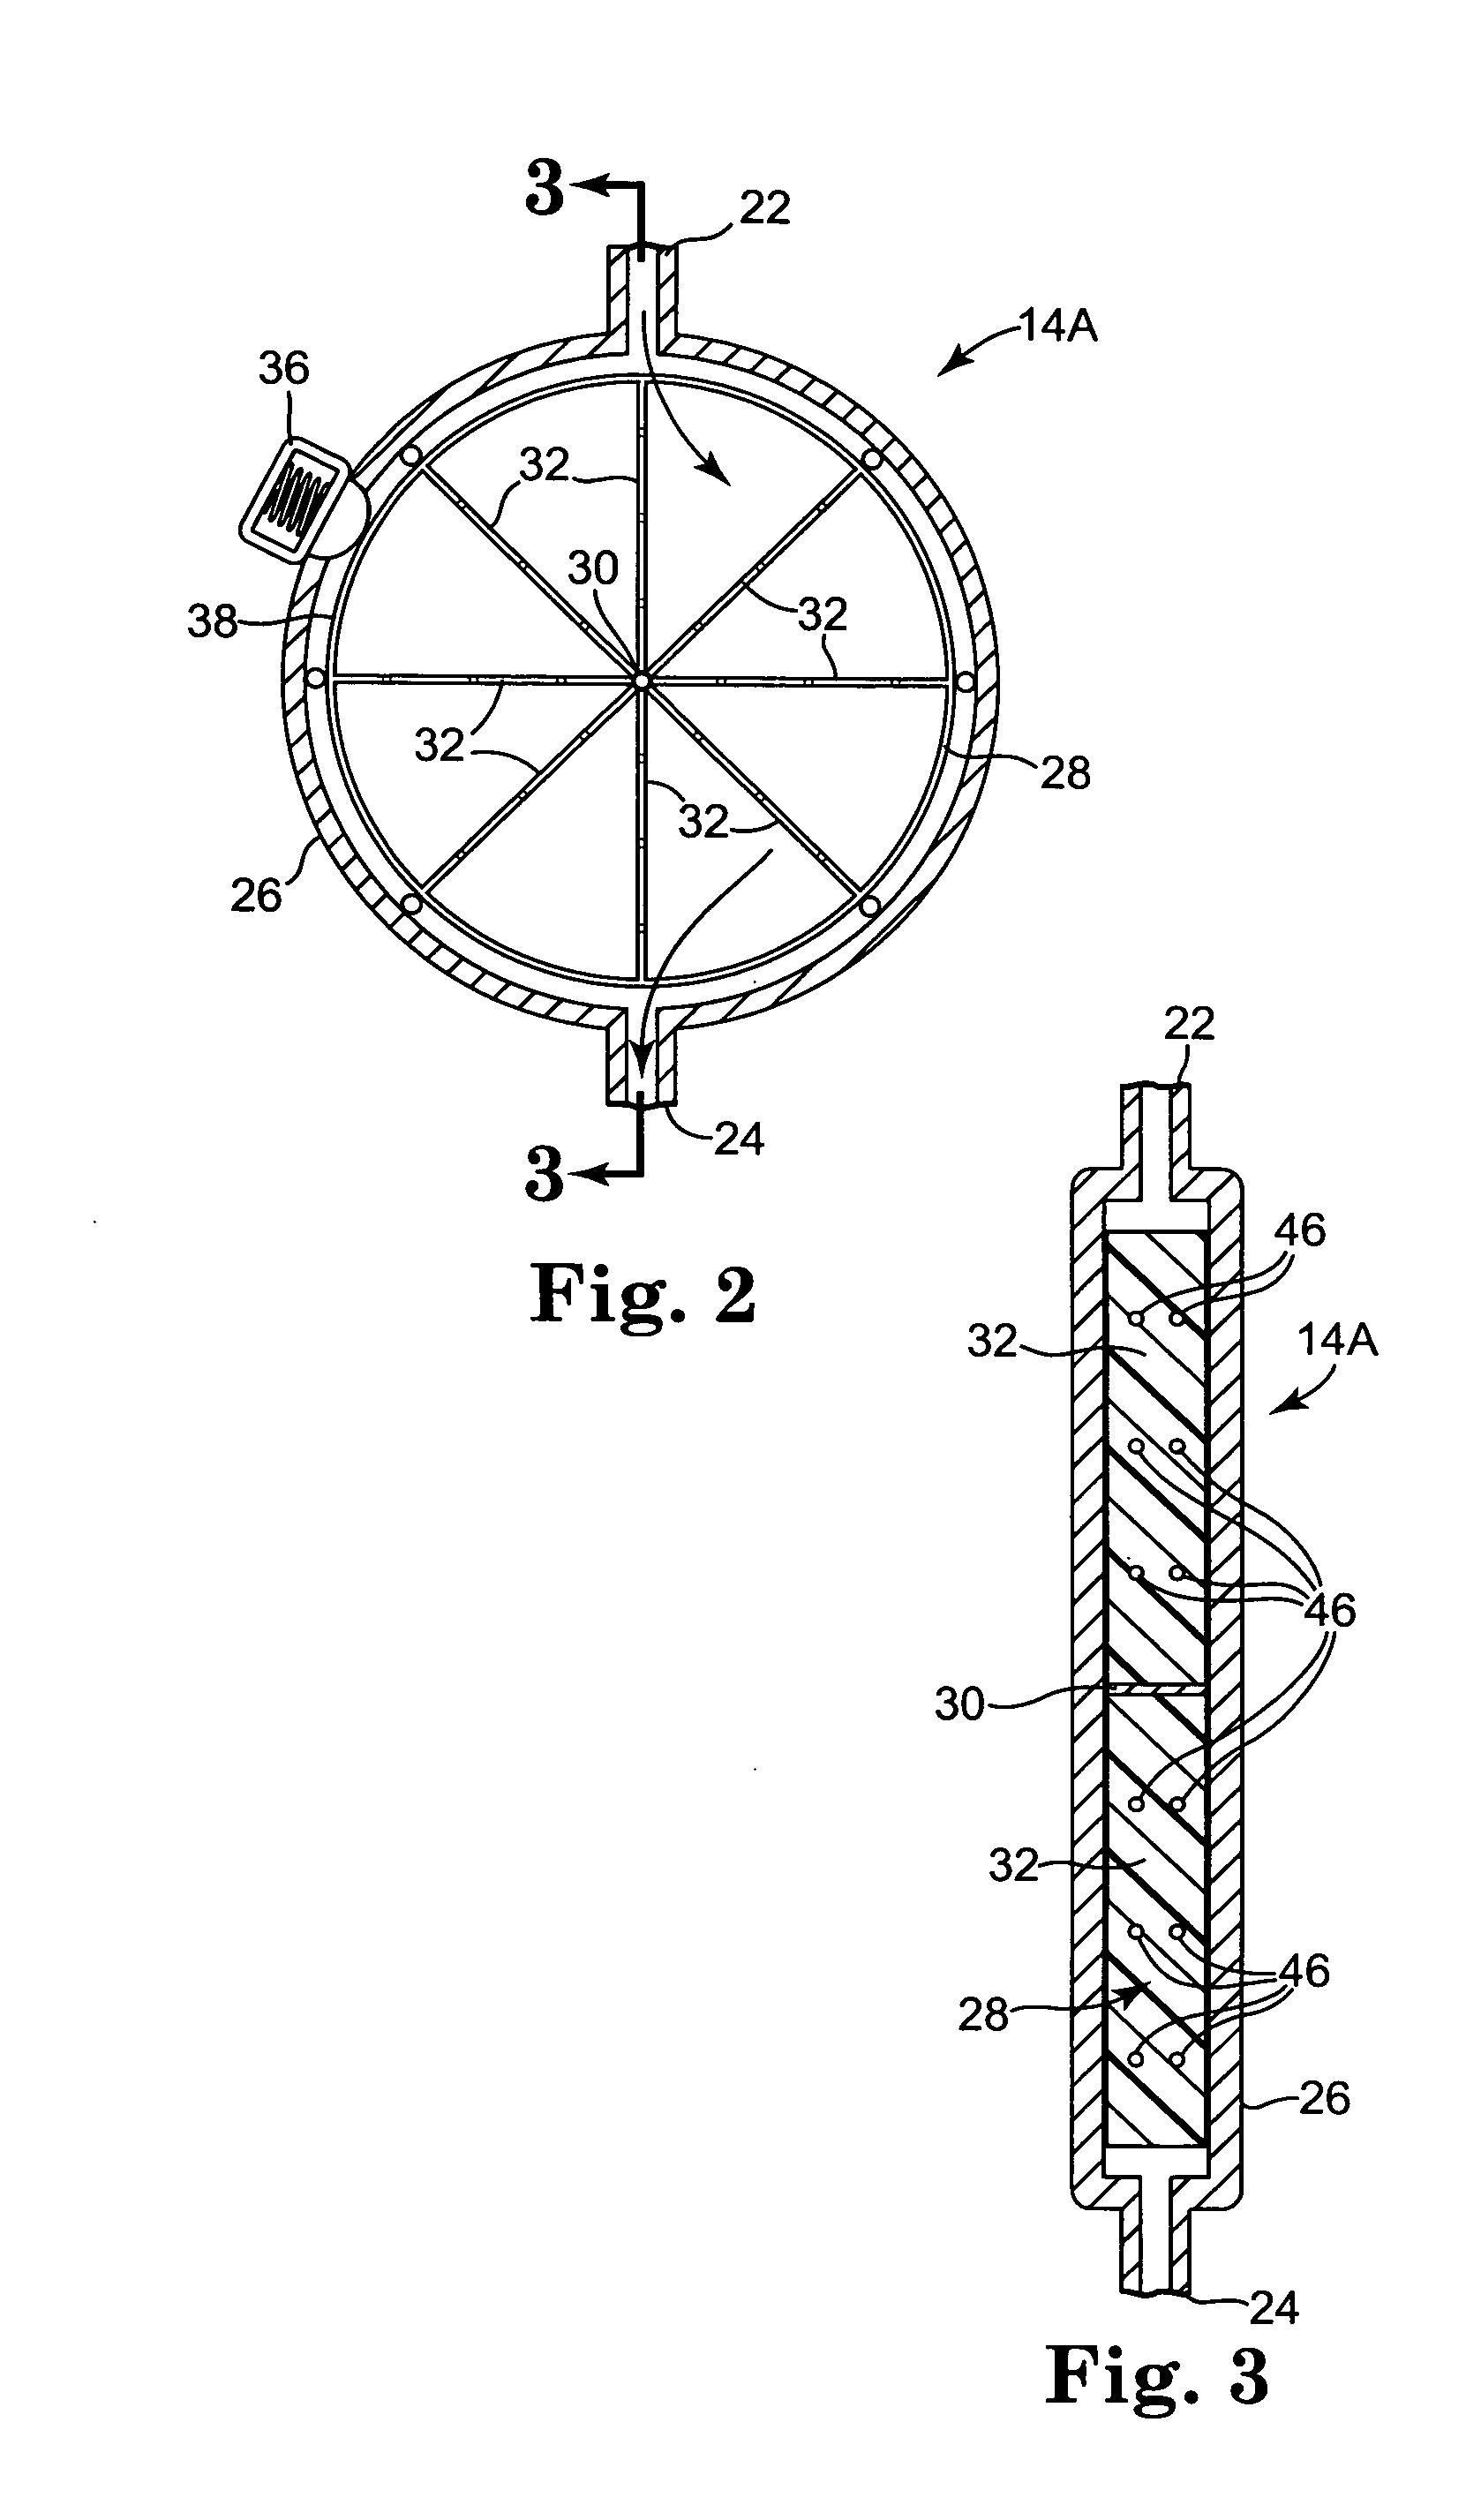 Implantable cerebral spinal fluid flow device and method of controlling flow of cerebral spinal fluid